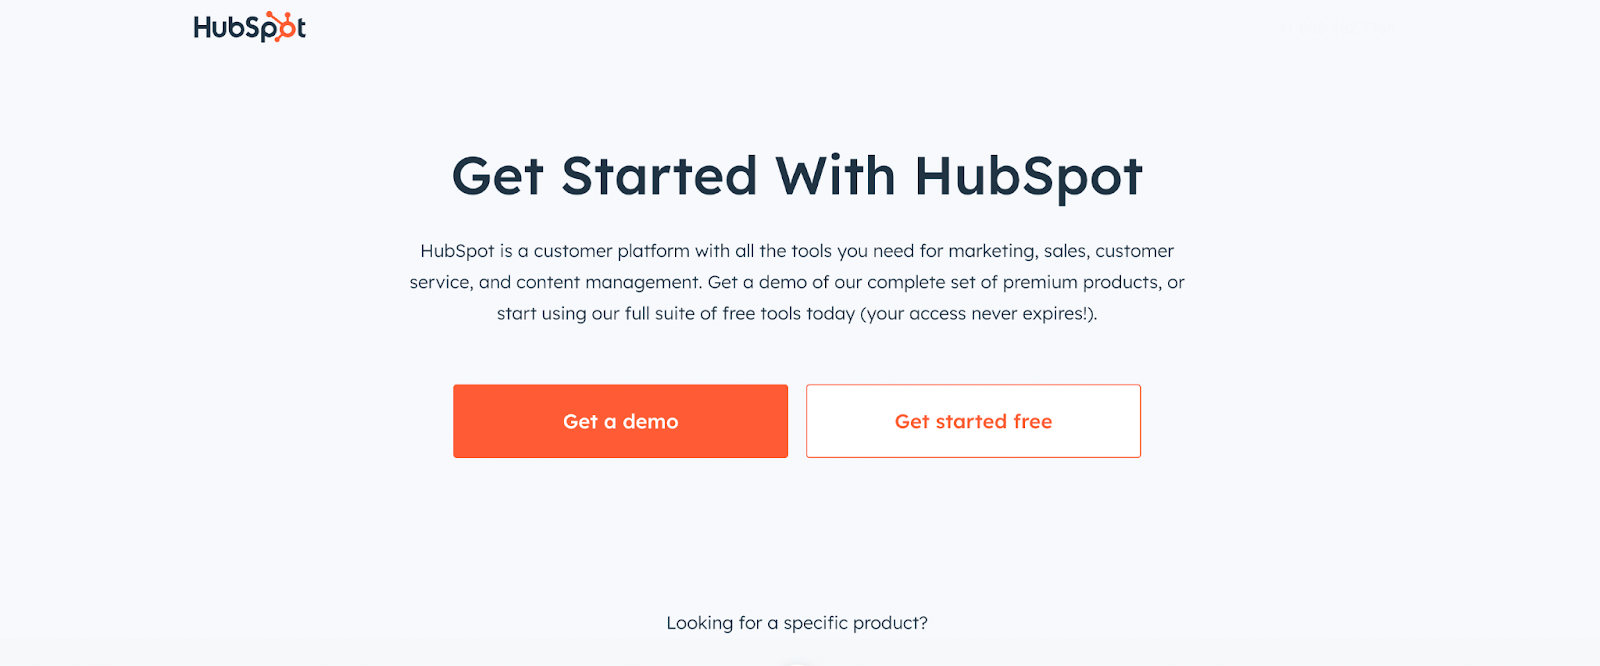 HubSpot focuses on building excellent customer experiences